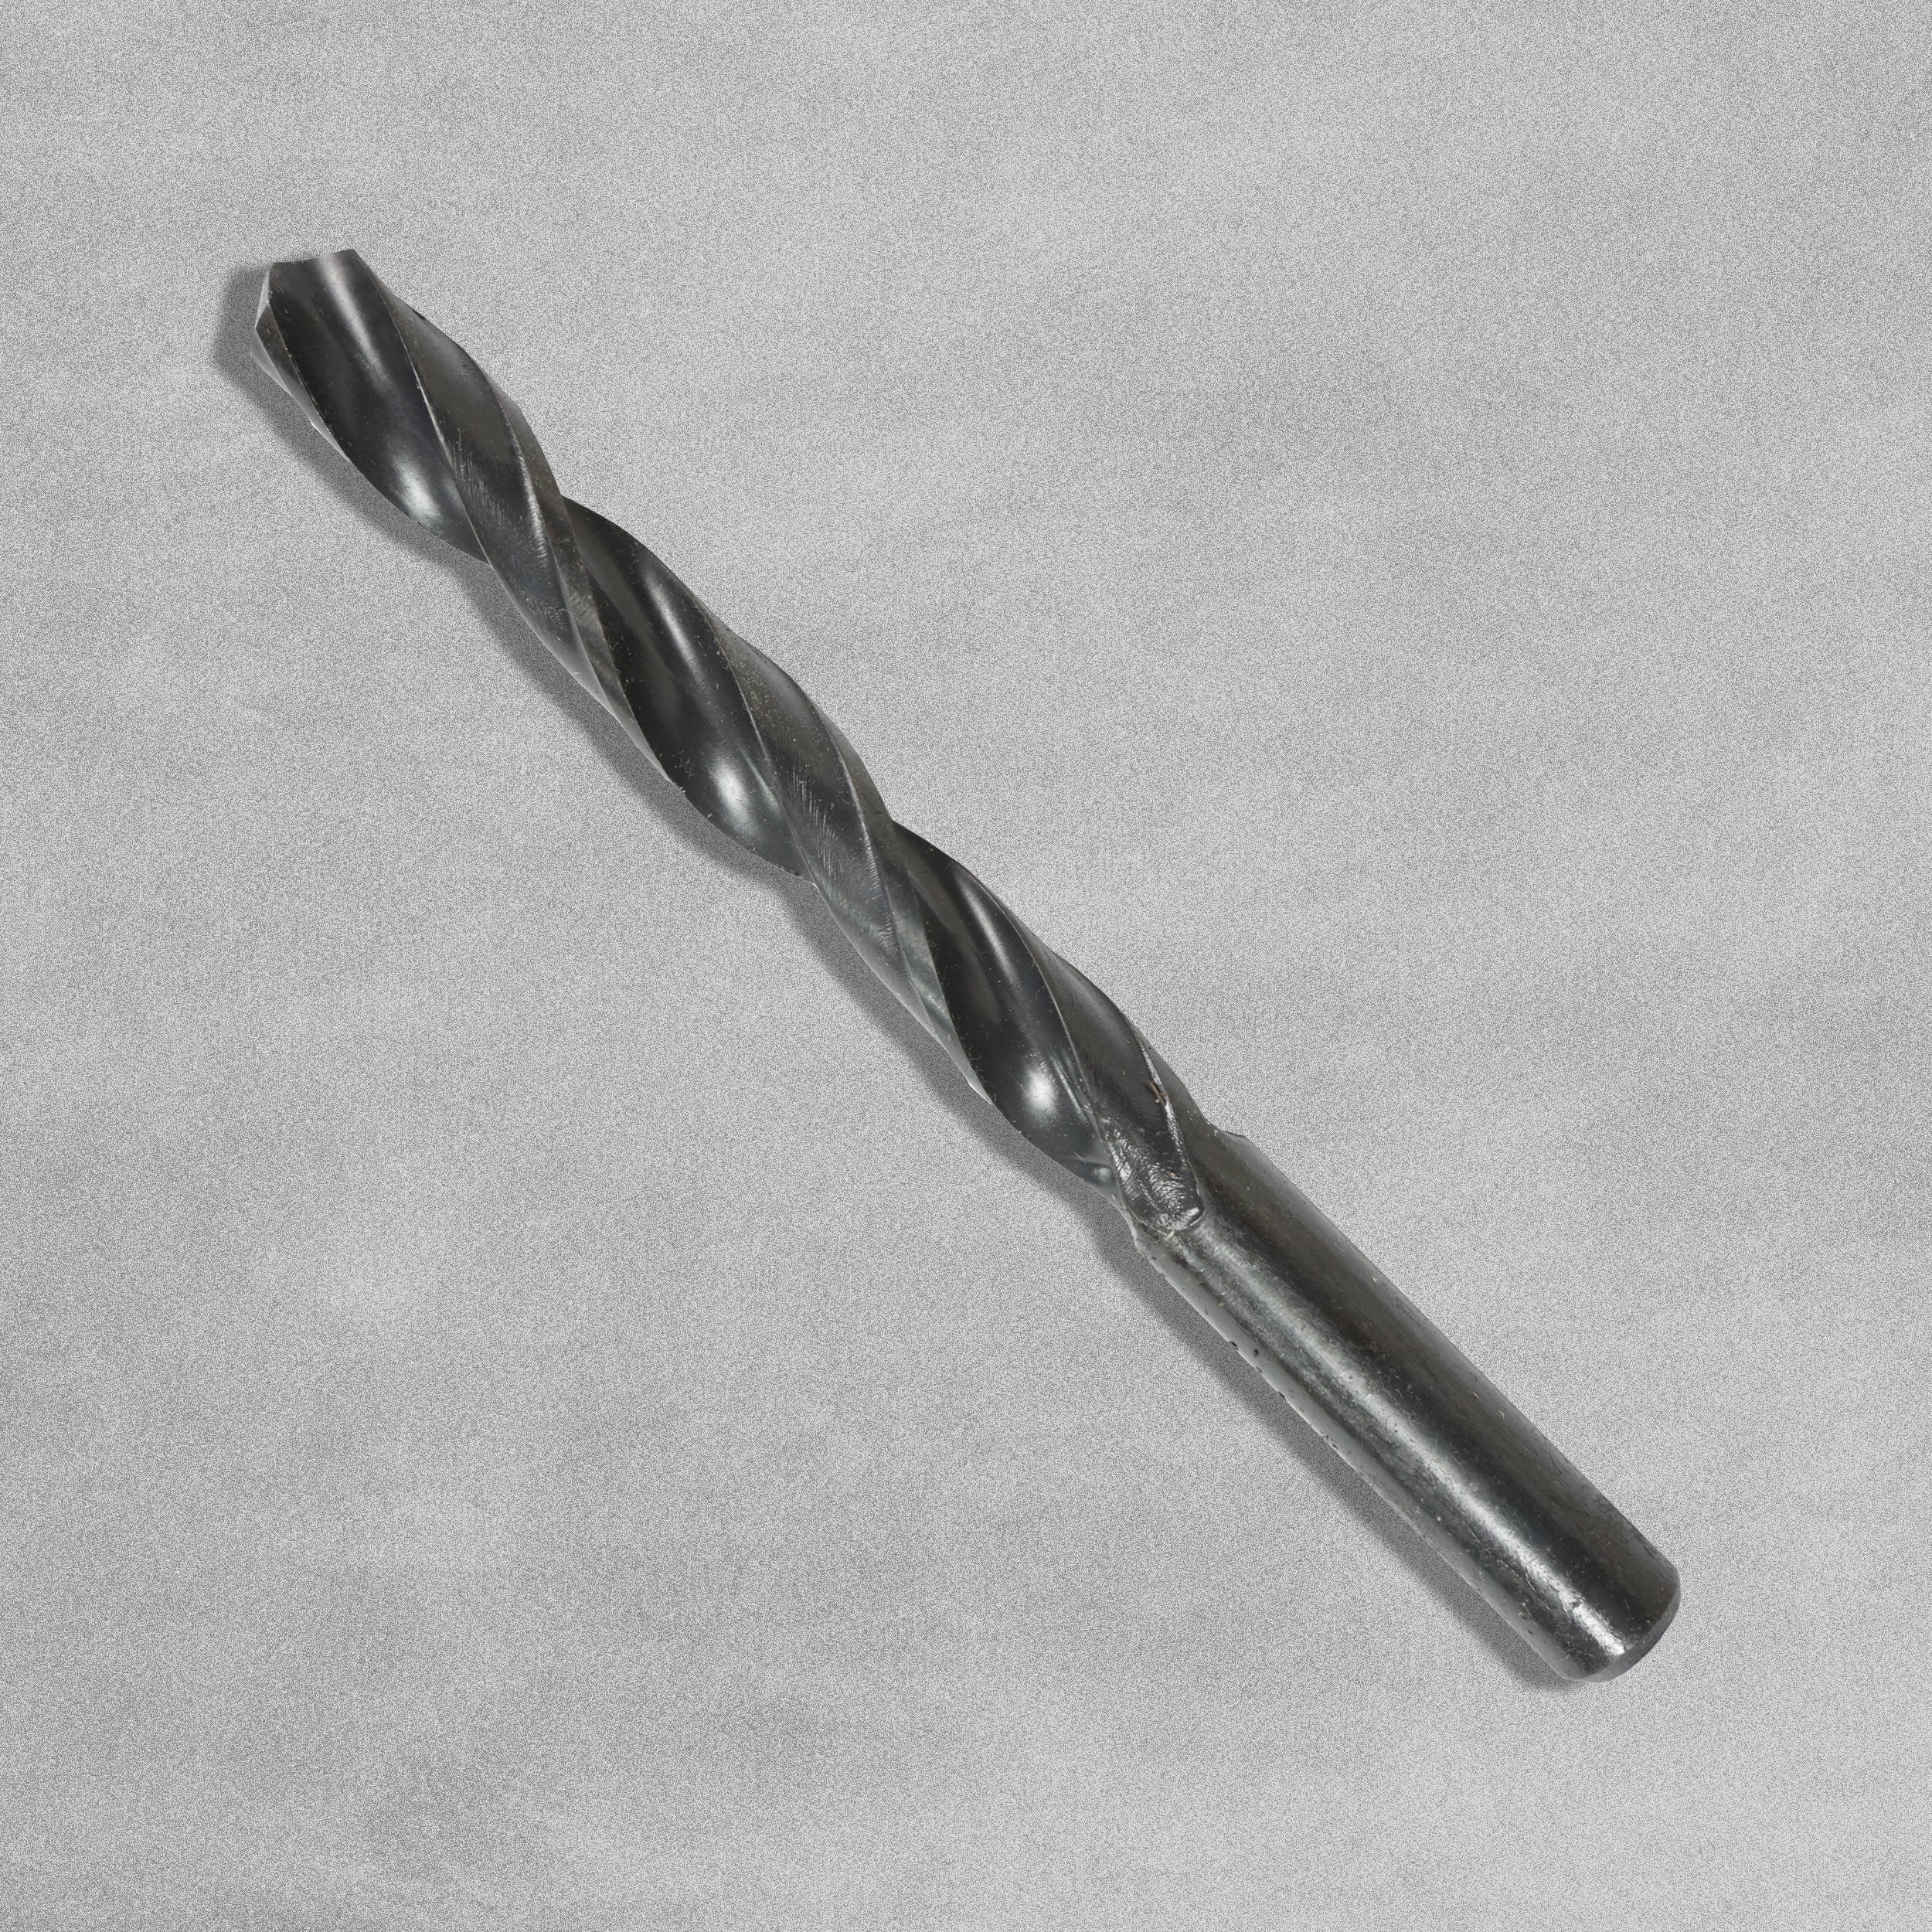 HSS Metal Long Series Drill Bit 12.3mm by BBW Germany, sold by In-Excess